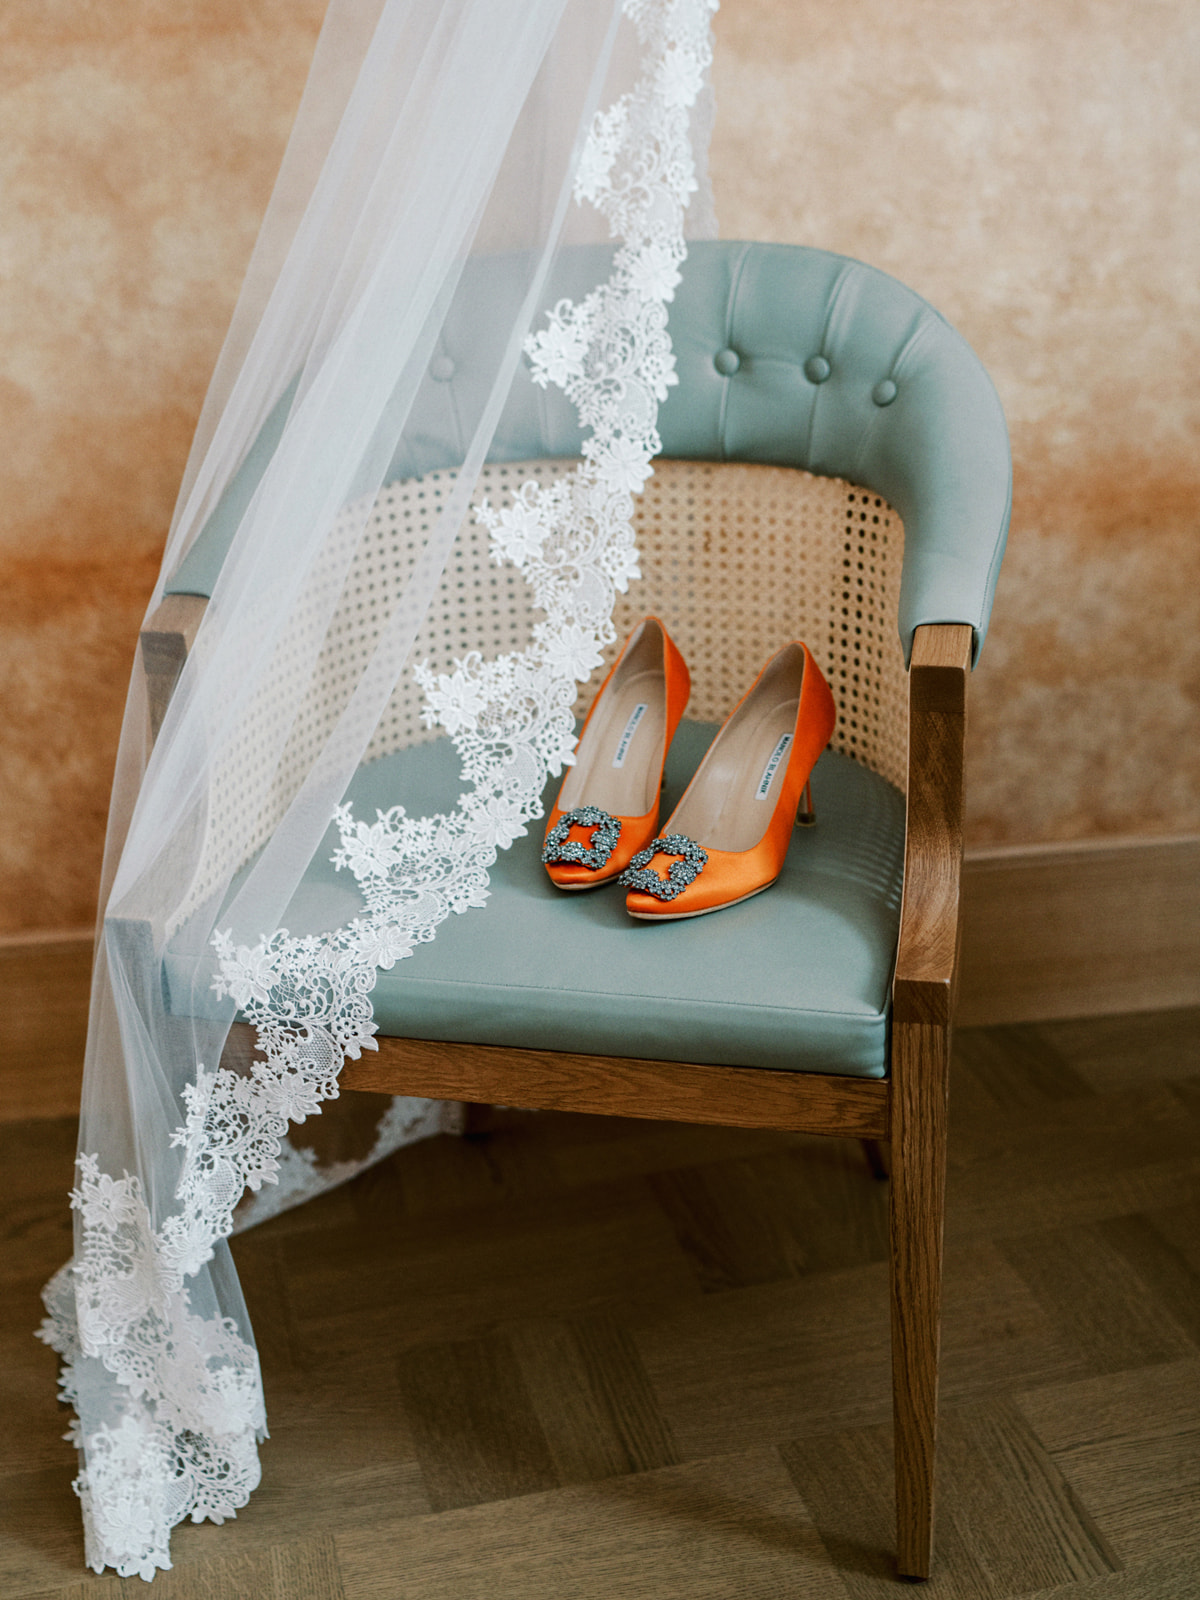 Manolo Blahnik orange shoes and wedding detail while getting ready at at Sommerro House Oslo for wedding